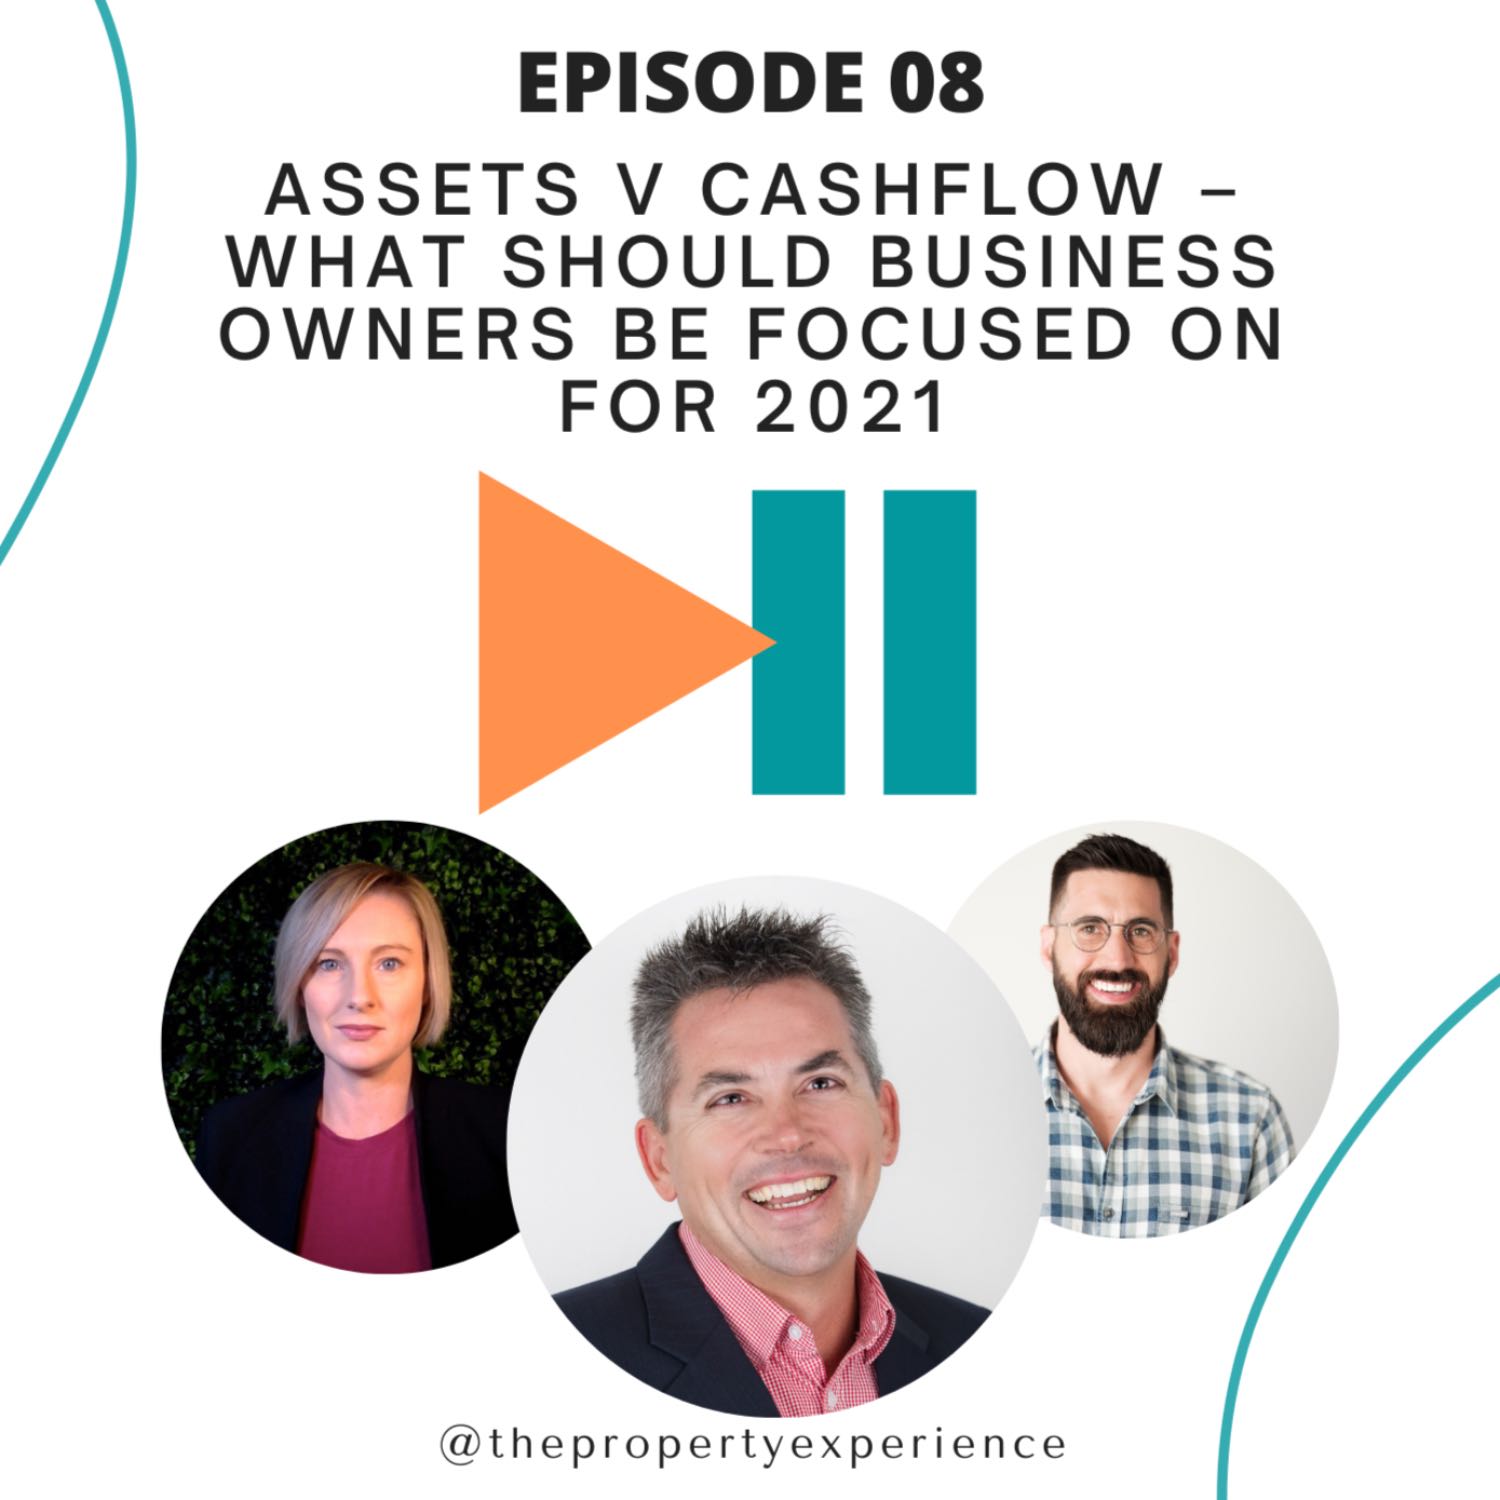 Assets V Cashflow – What should business owners be focused on for 2021 - The Property Experience Podcast